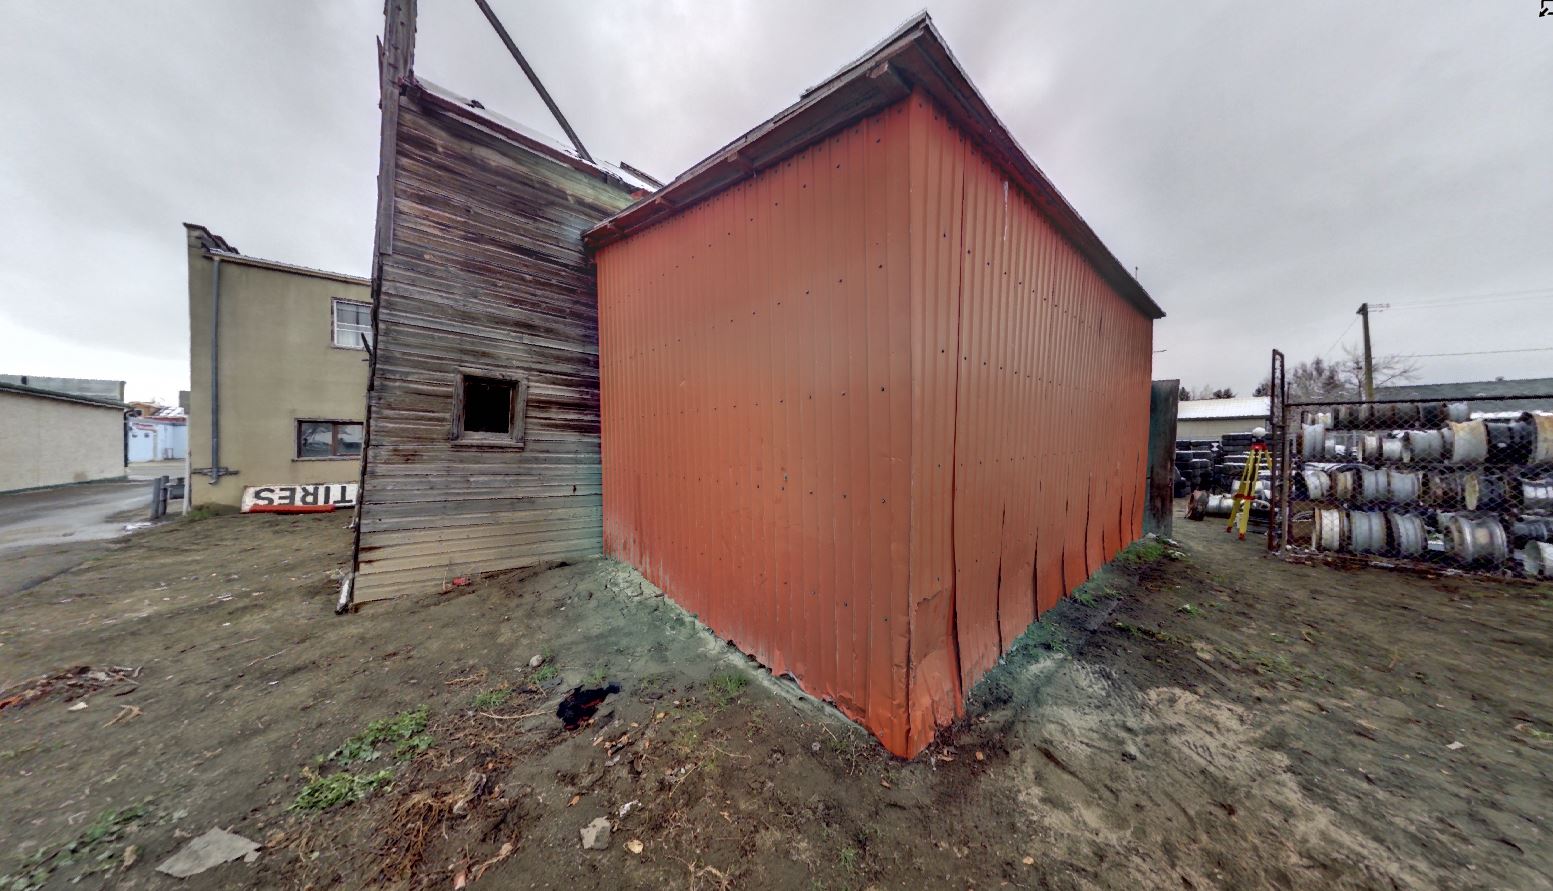 Panoramic view of scanning location 7 of the Quon Sang Lung Laundry Shop.